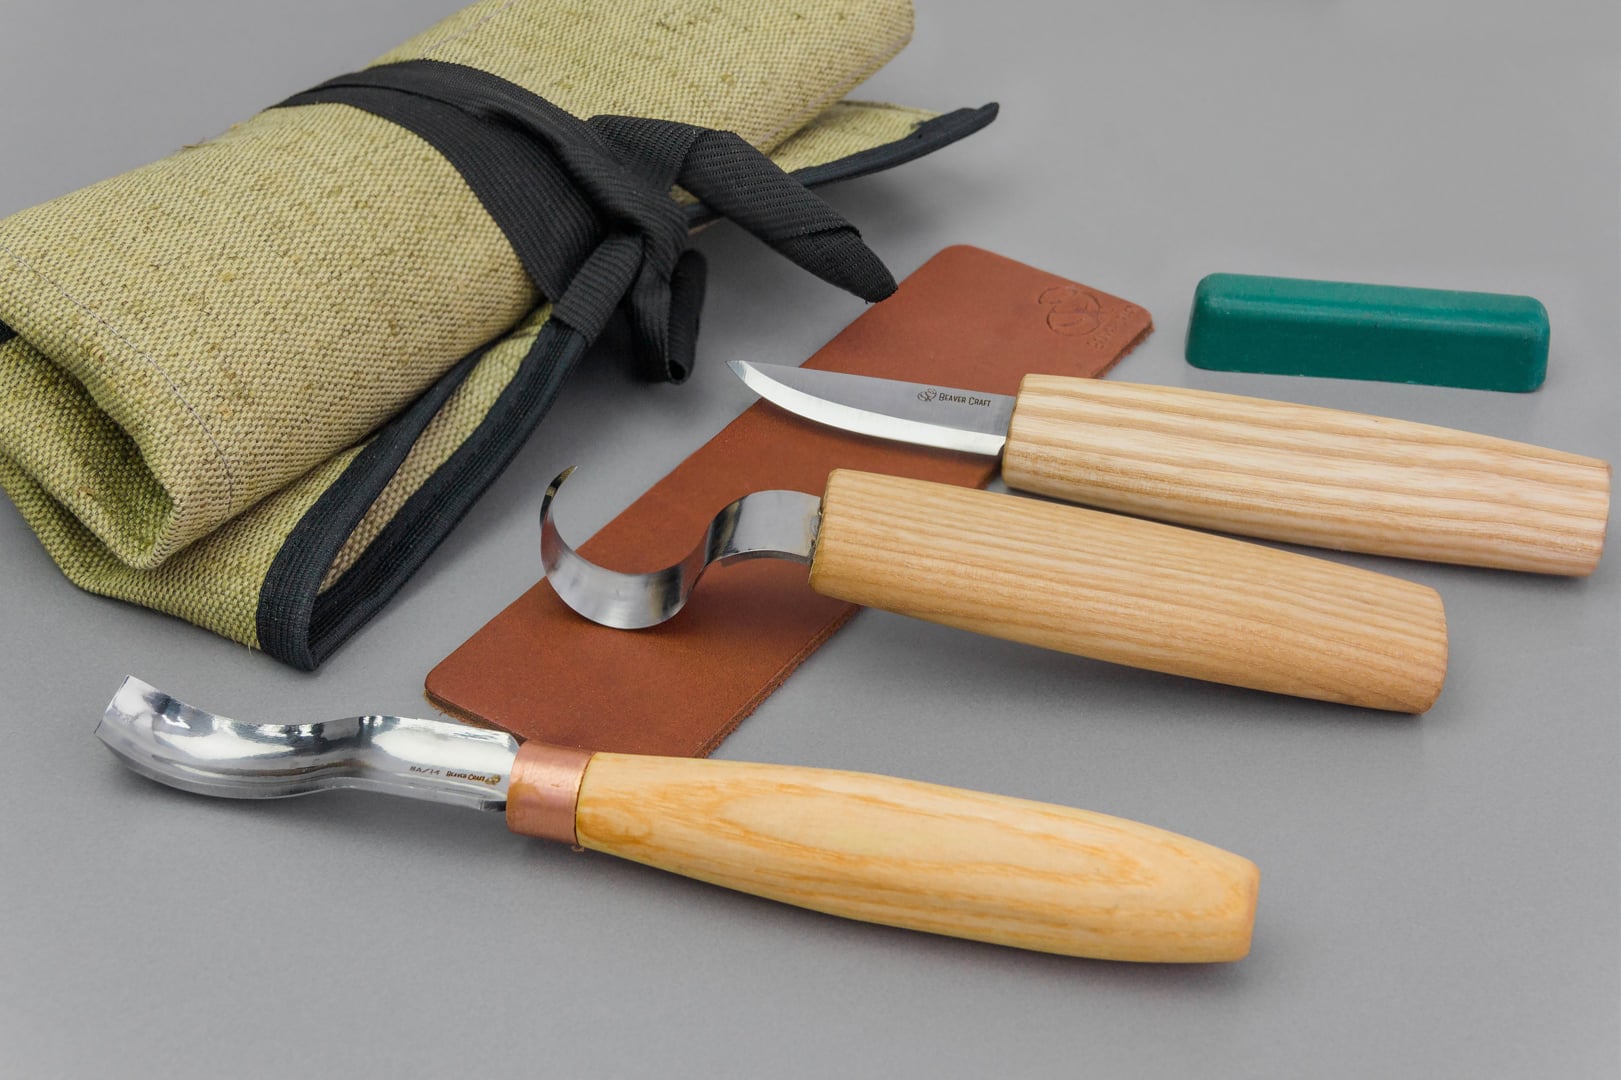 Spoon Carving Set, Explore Woodworking Tools